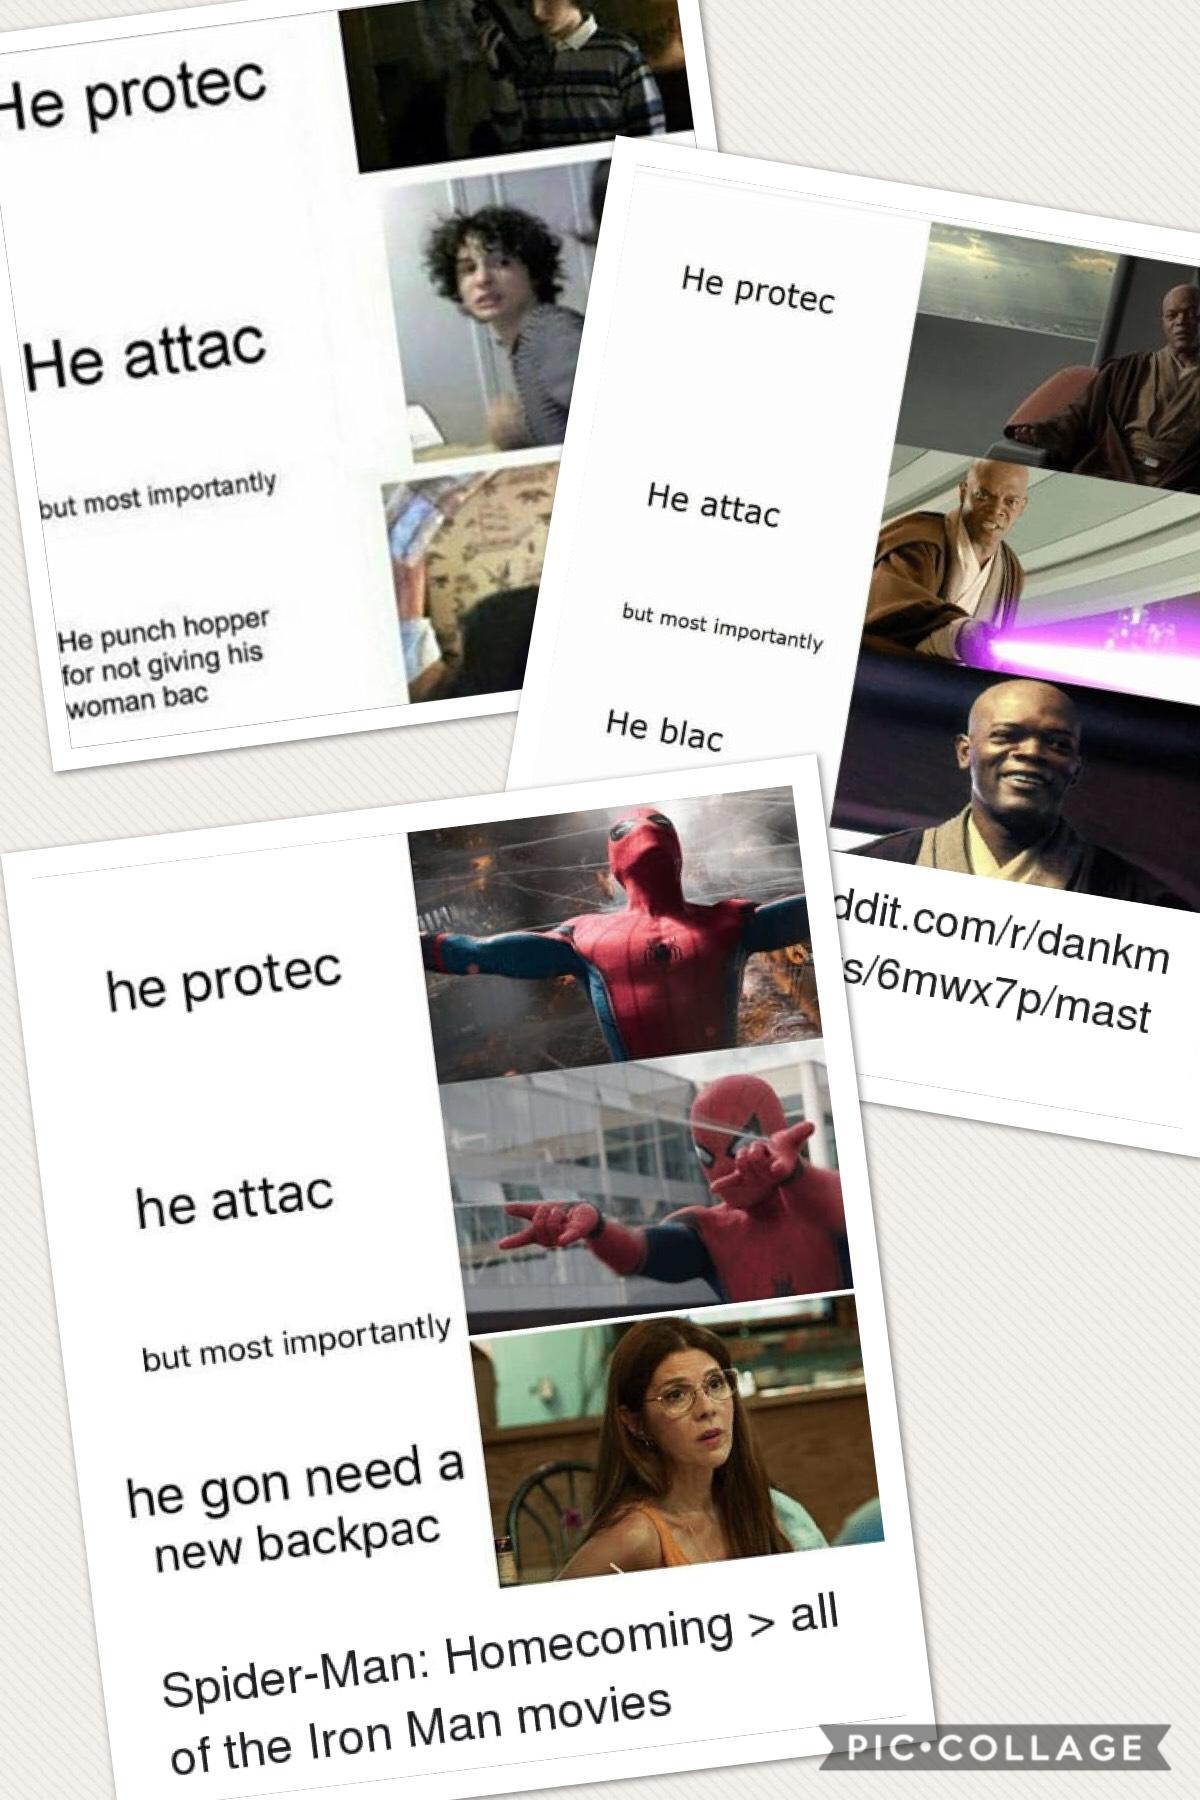 He protec. 
He attac
But most importantly he...